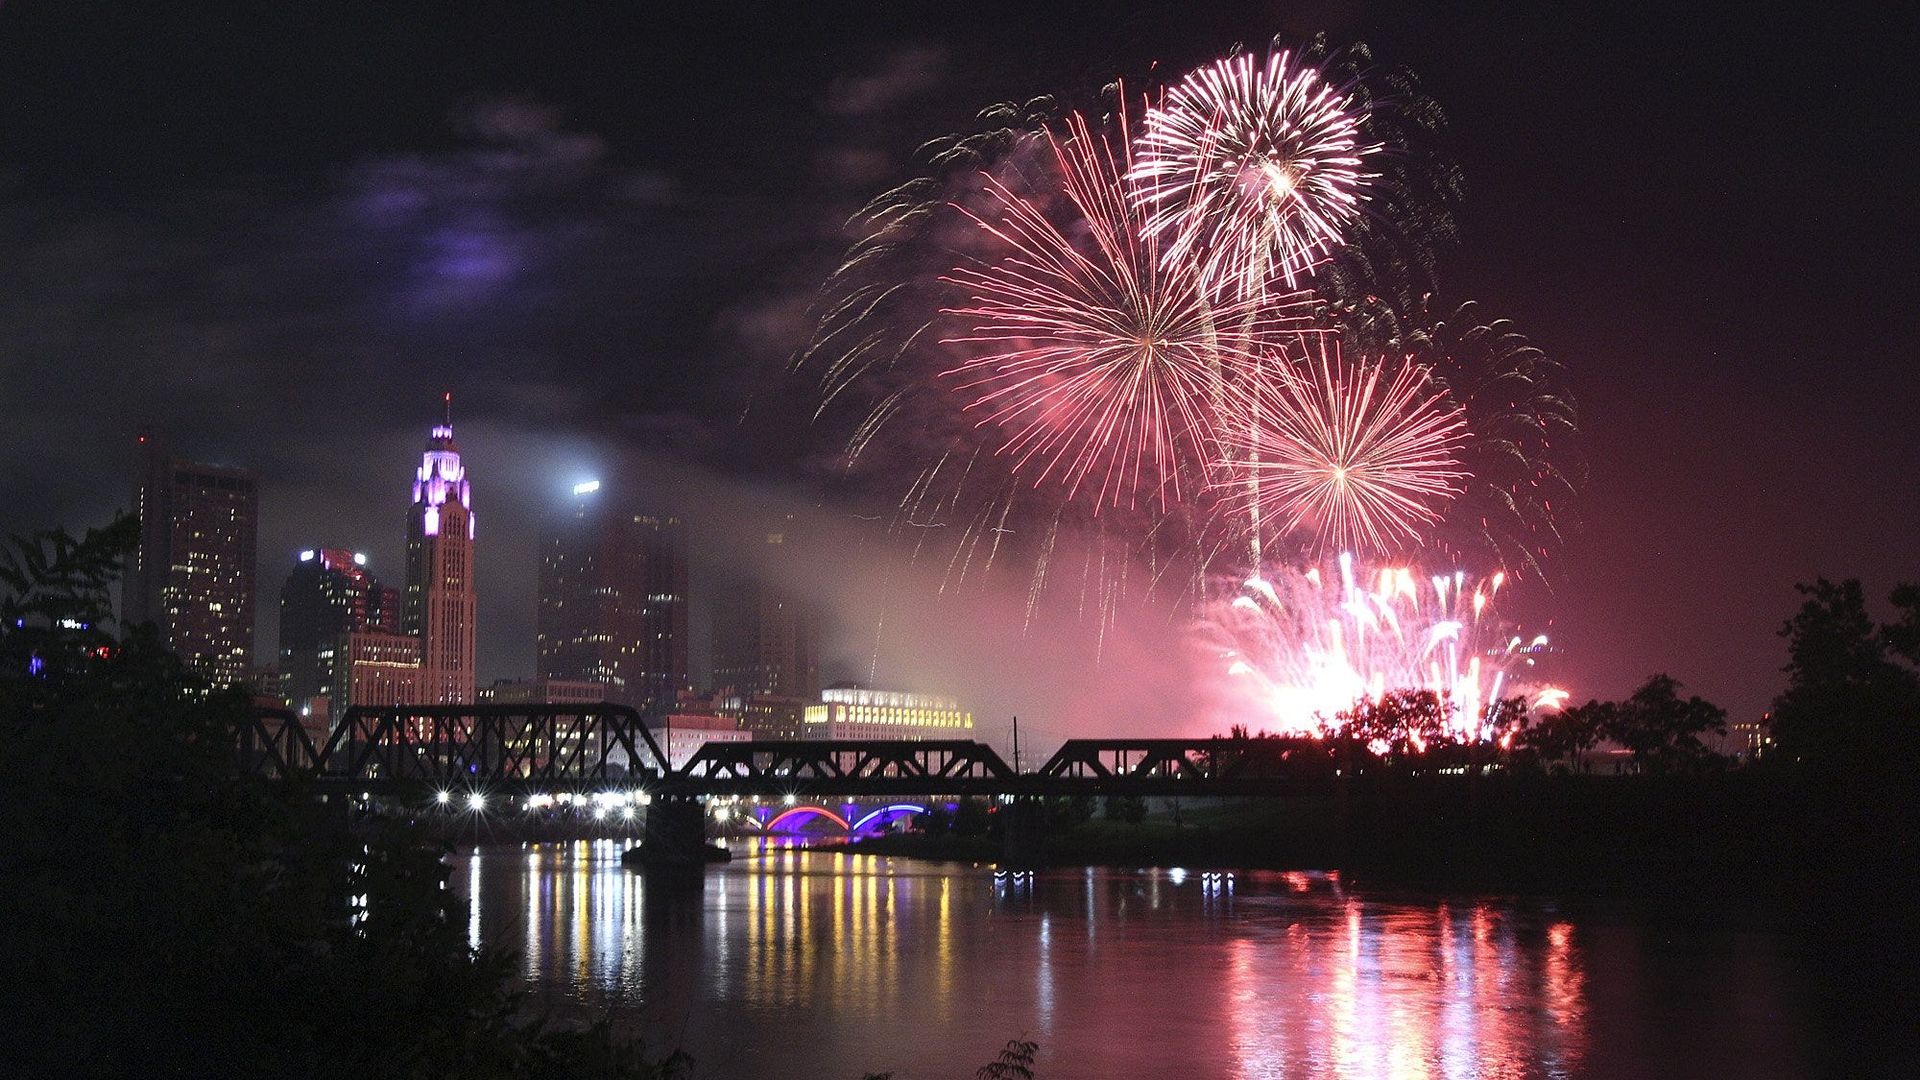 Fireworks explode over the Scioto River